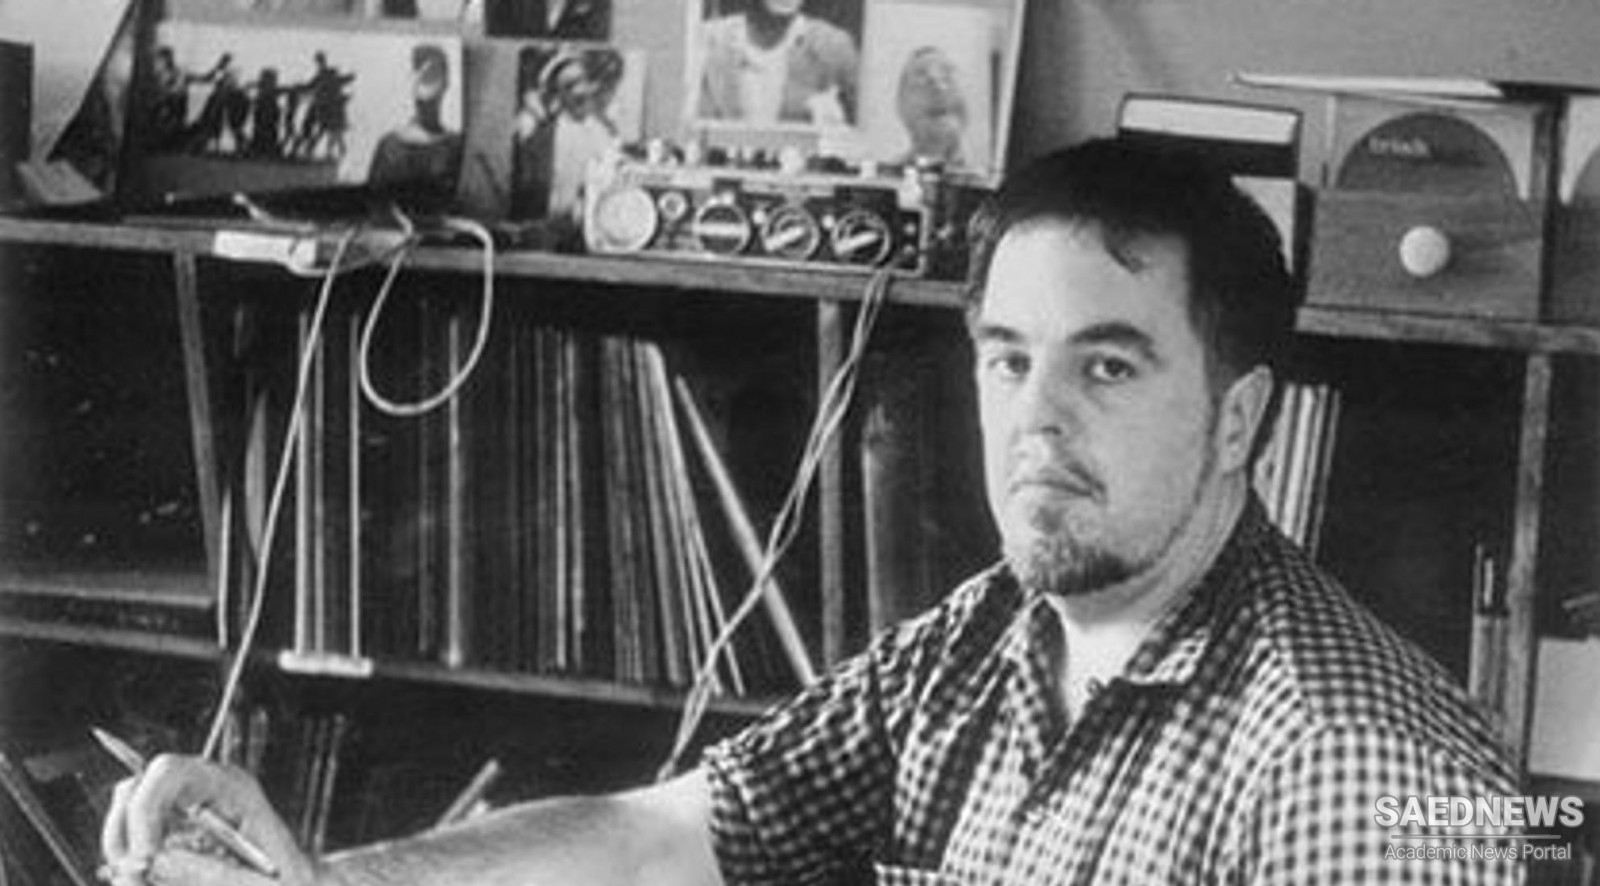 Alan Lomax and People’s Music